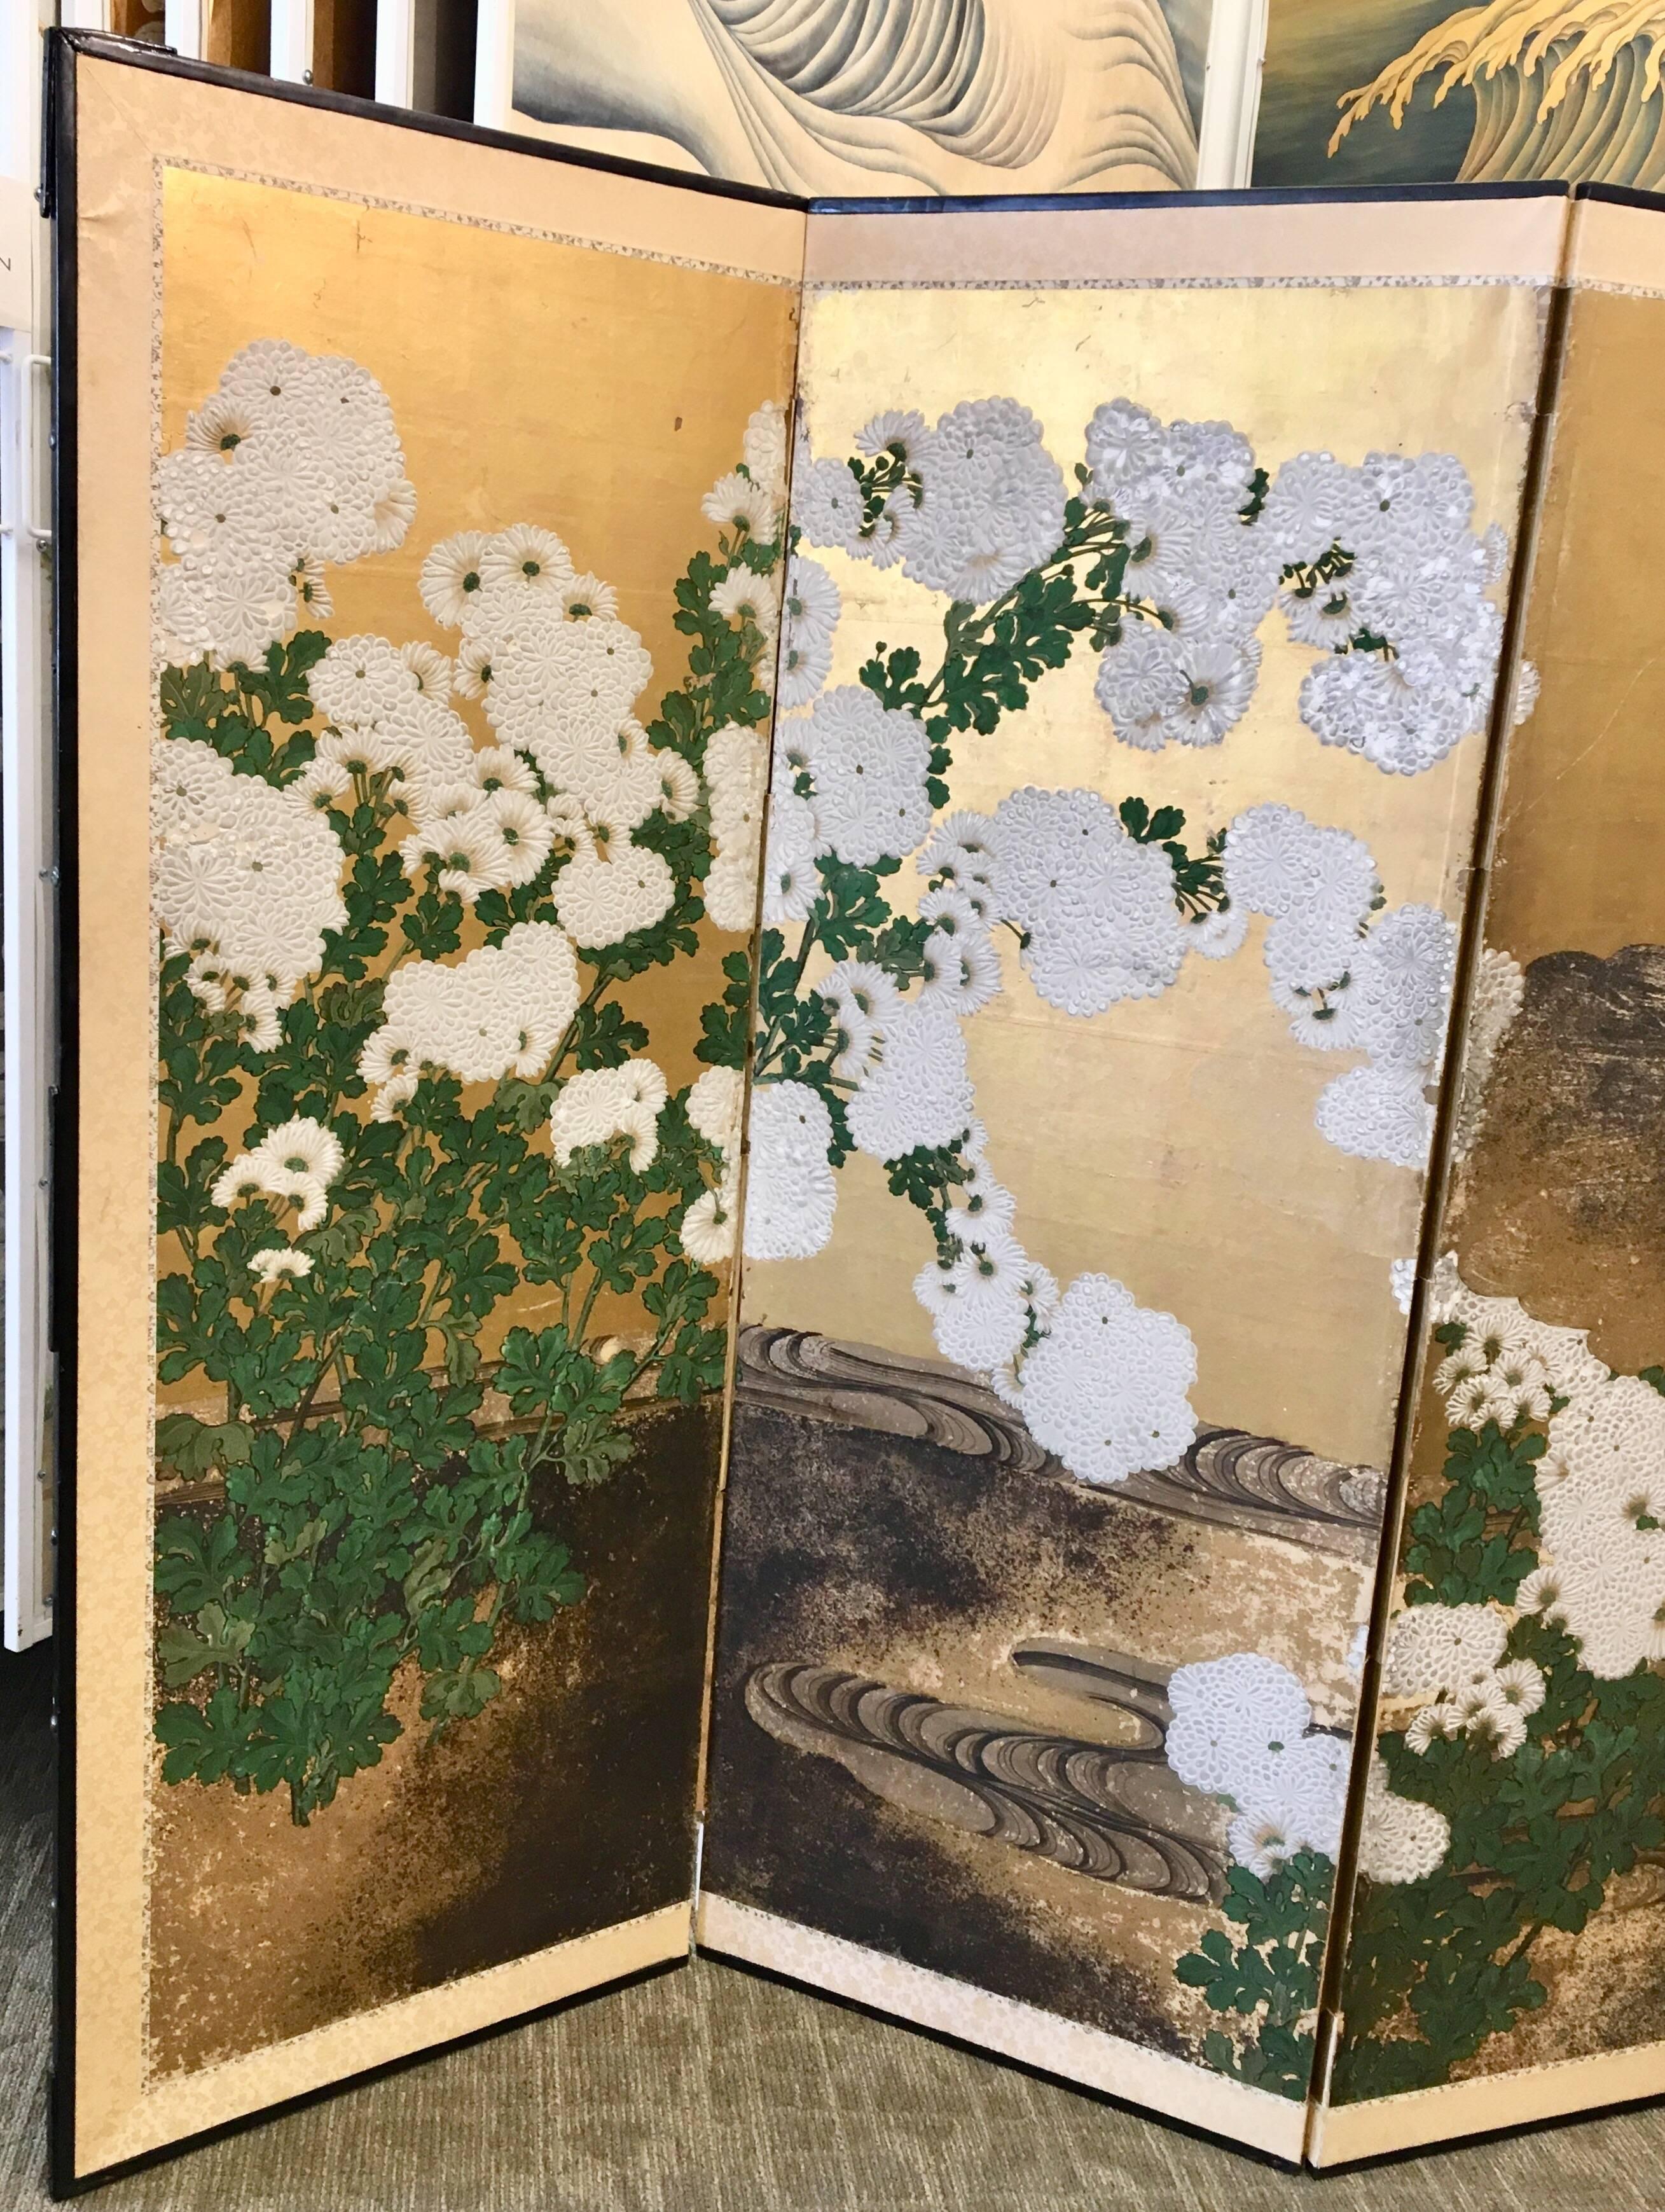 A beautiful six-panel early 19th century Japanese screen with raised gesso flowers and stylized stream, hand-painted on gold leaf.